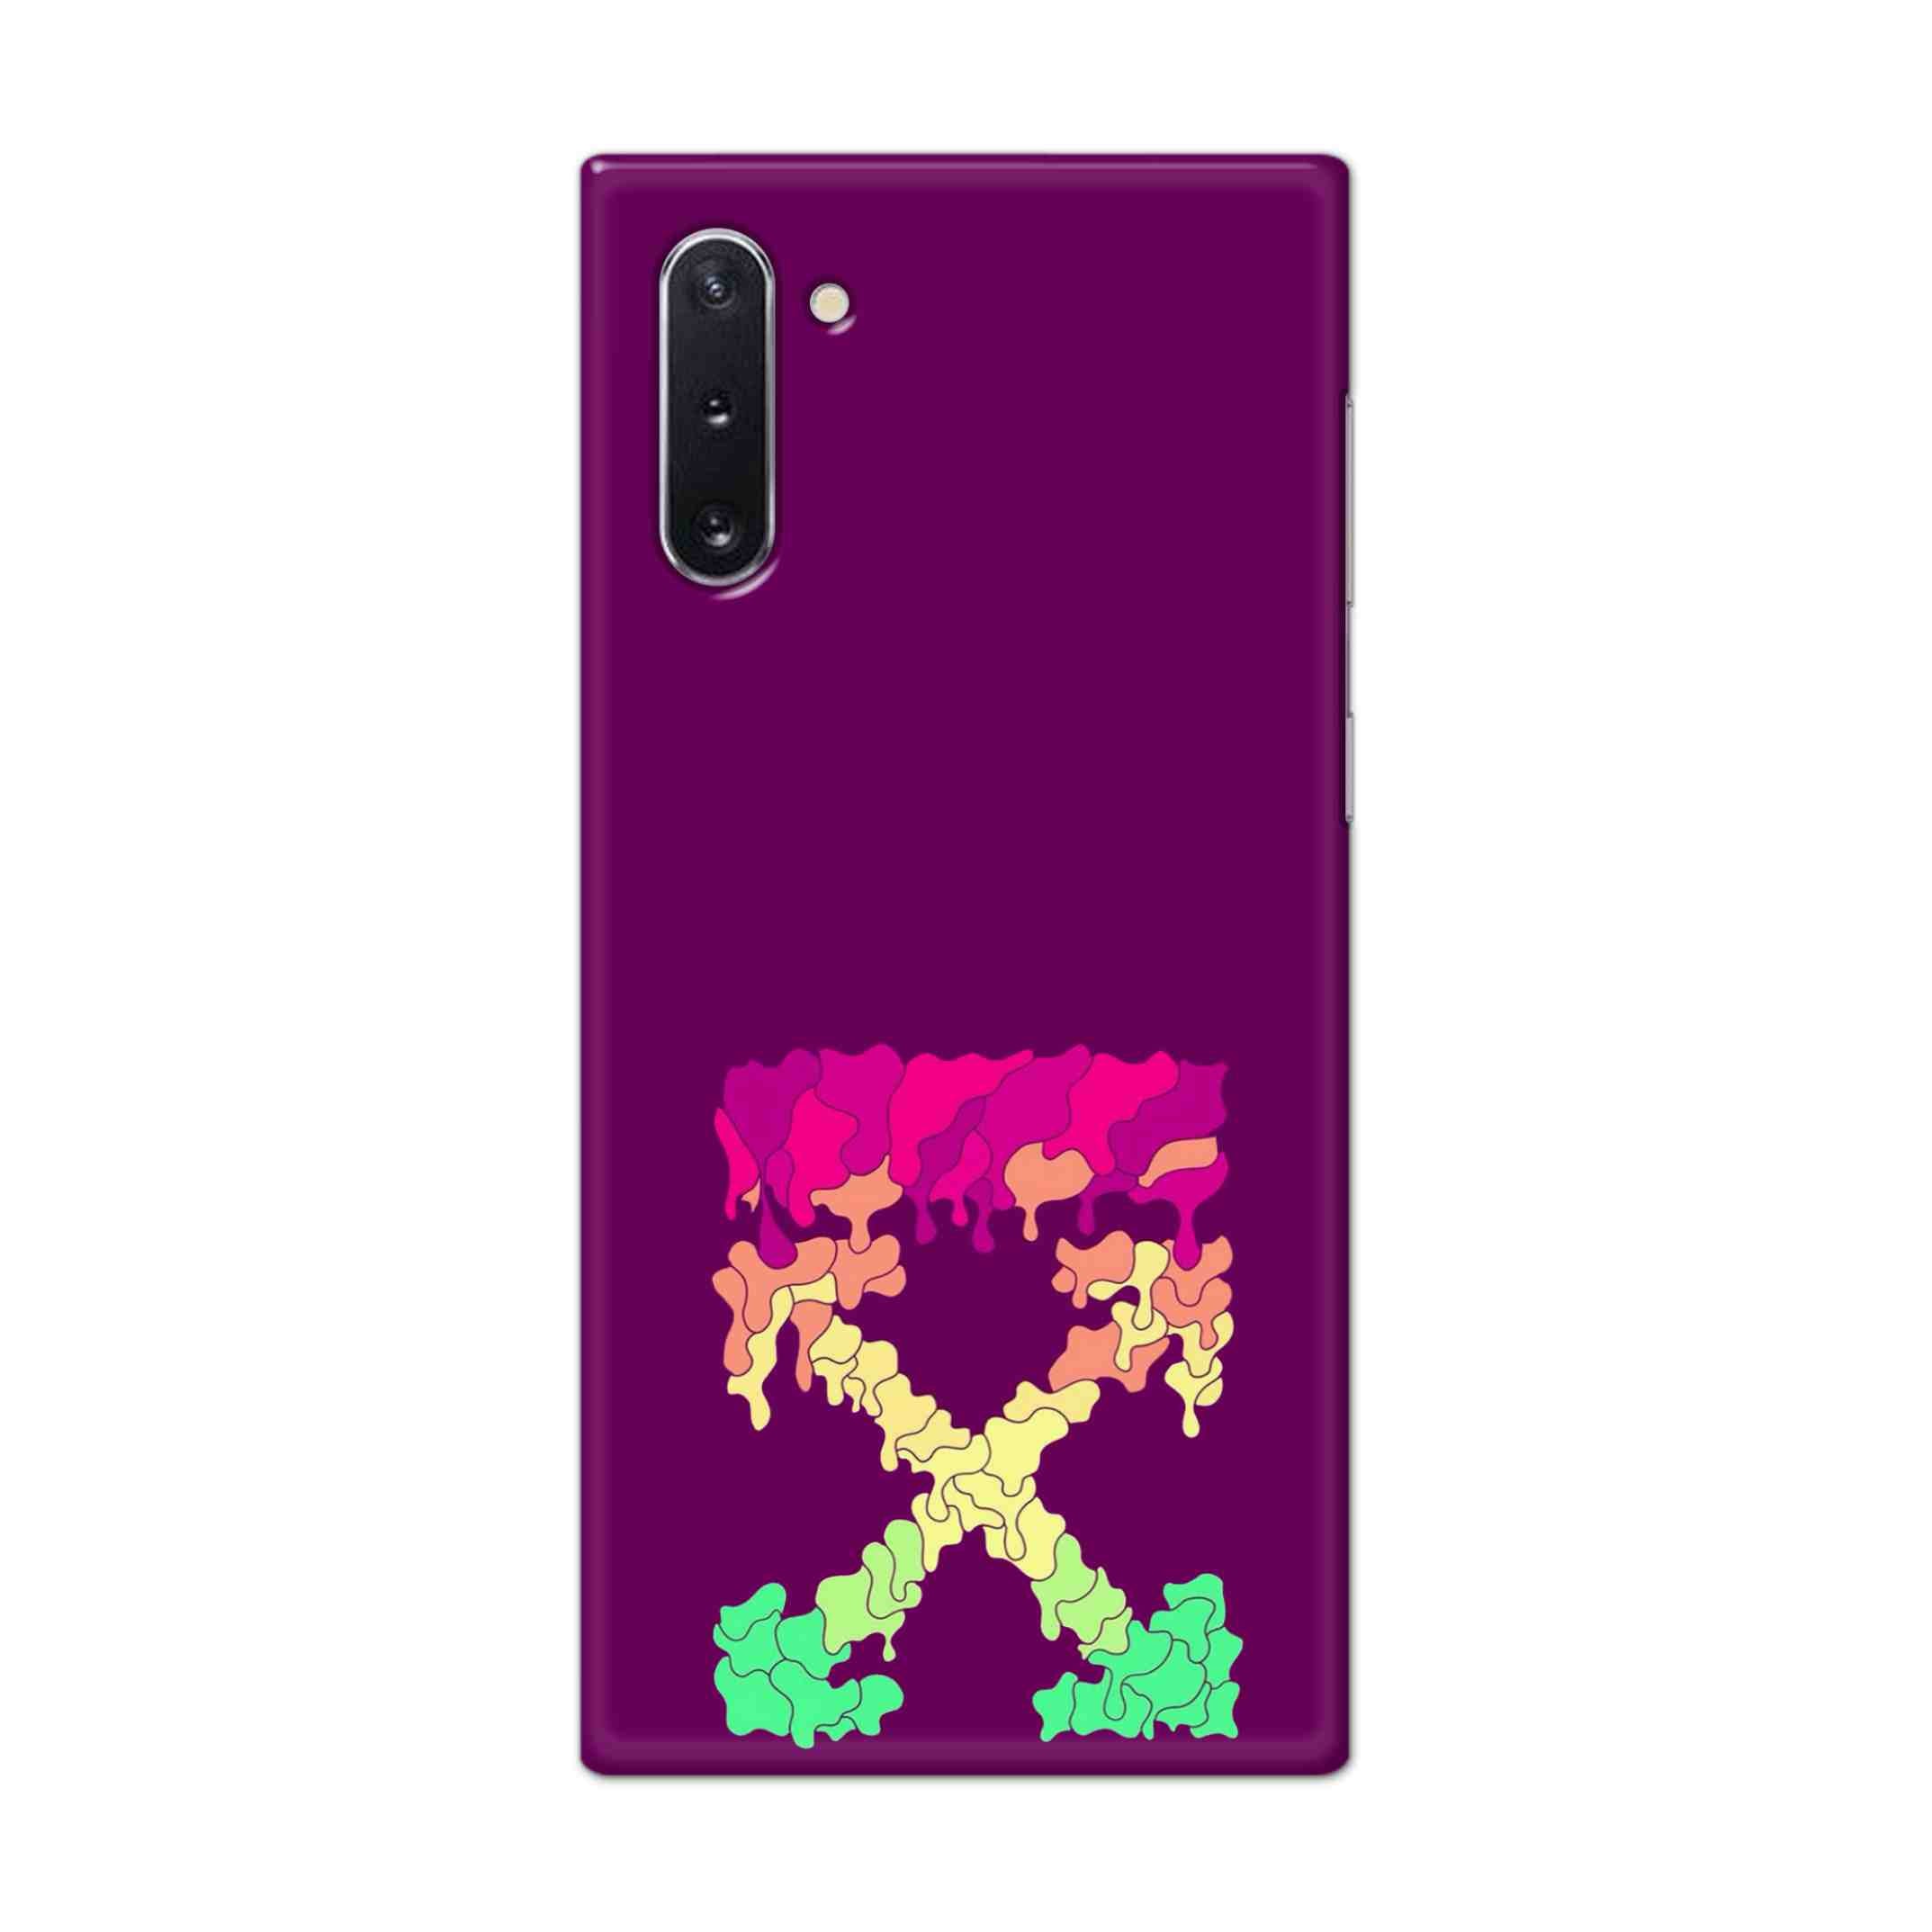 Buy X.O Hard Back Mobile Phone Case Cover For Samsung Galaxy Note 10 Online